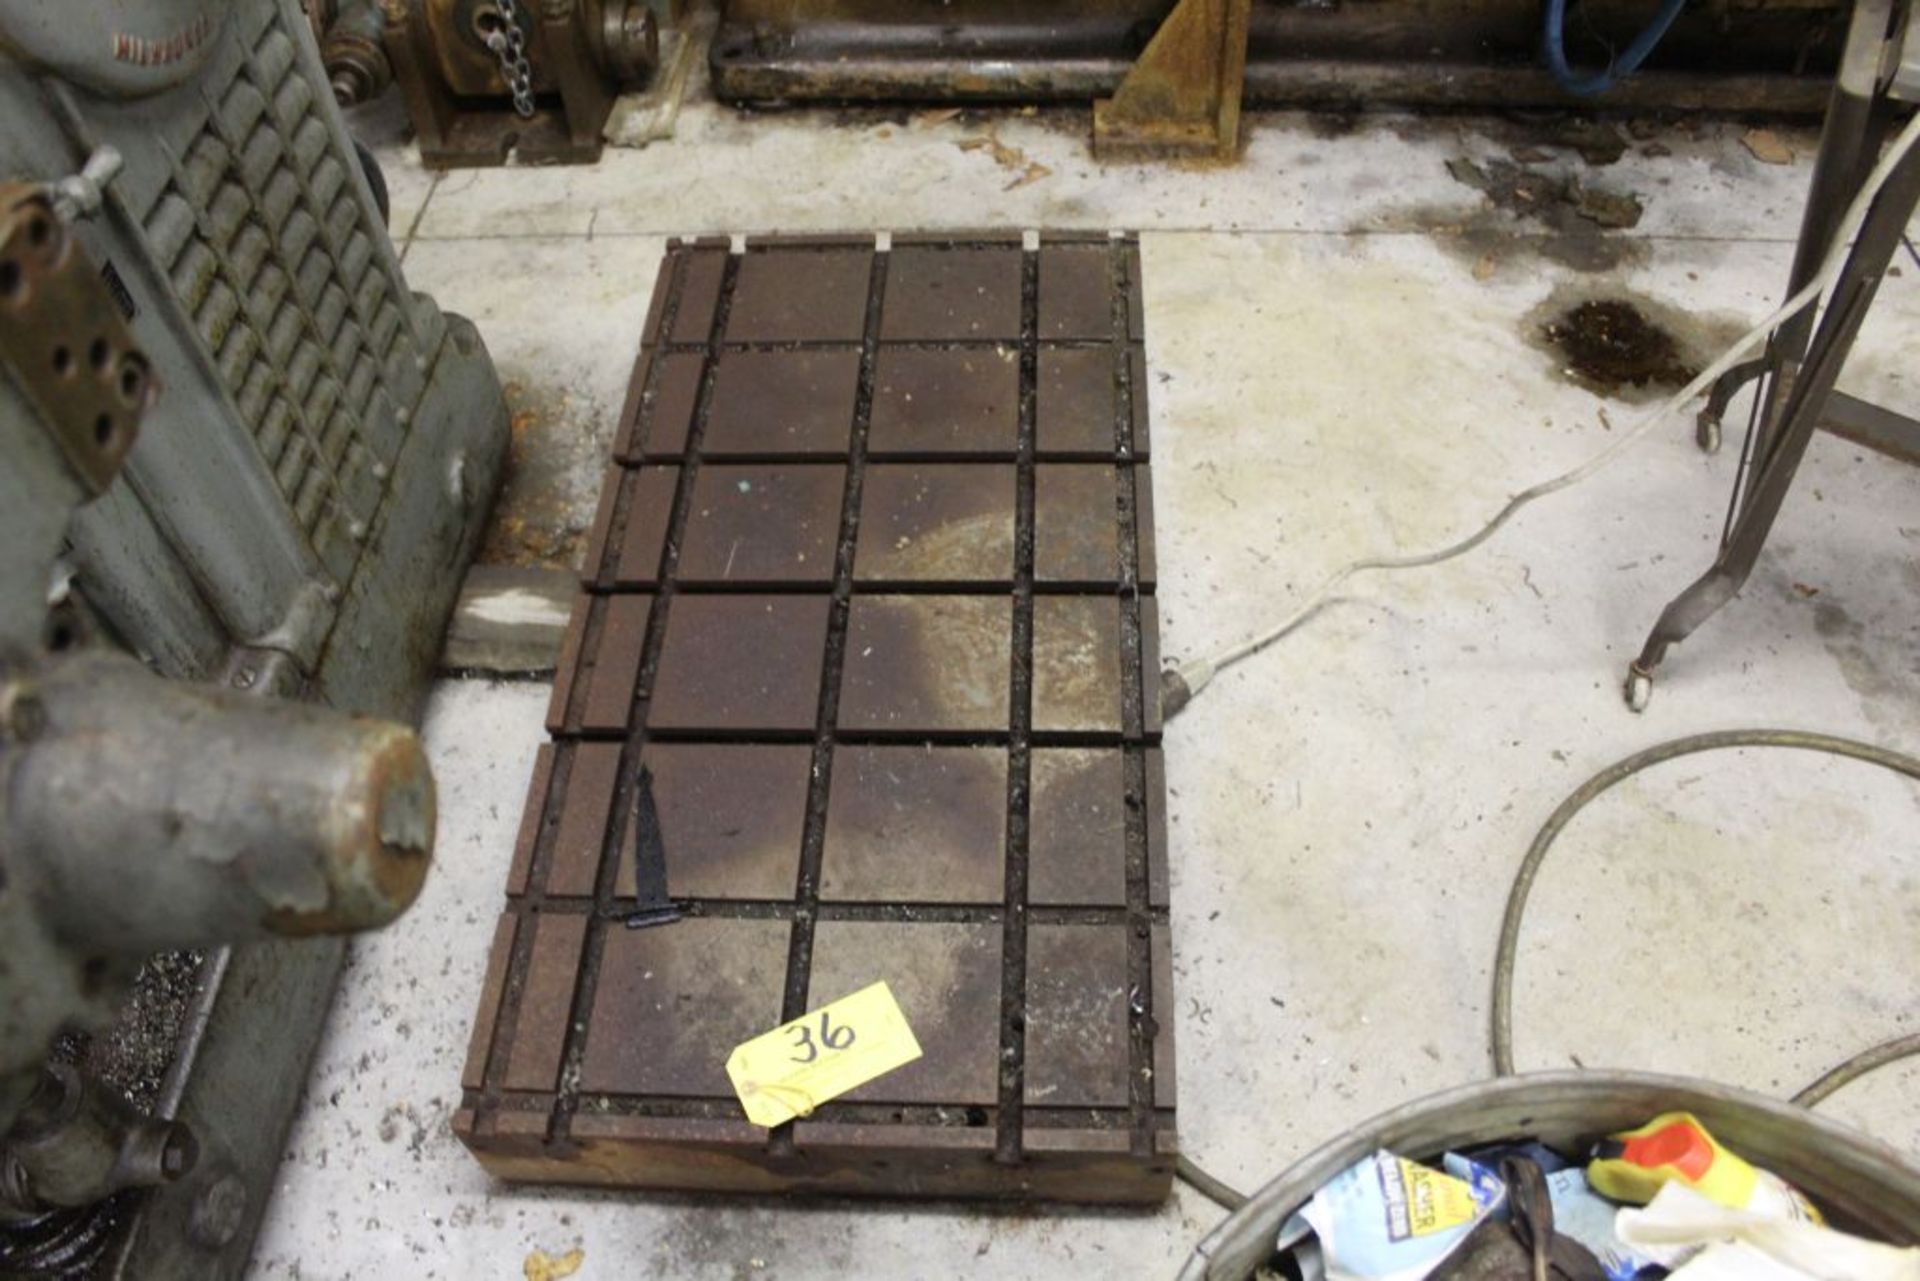 Slotted surface plate 41" x 21" x 6".